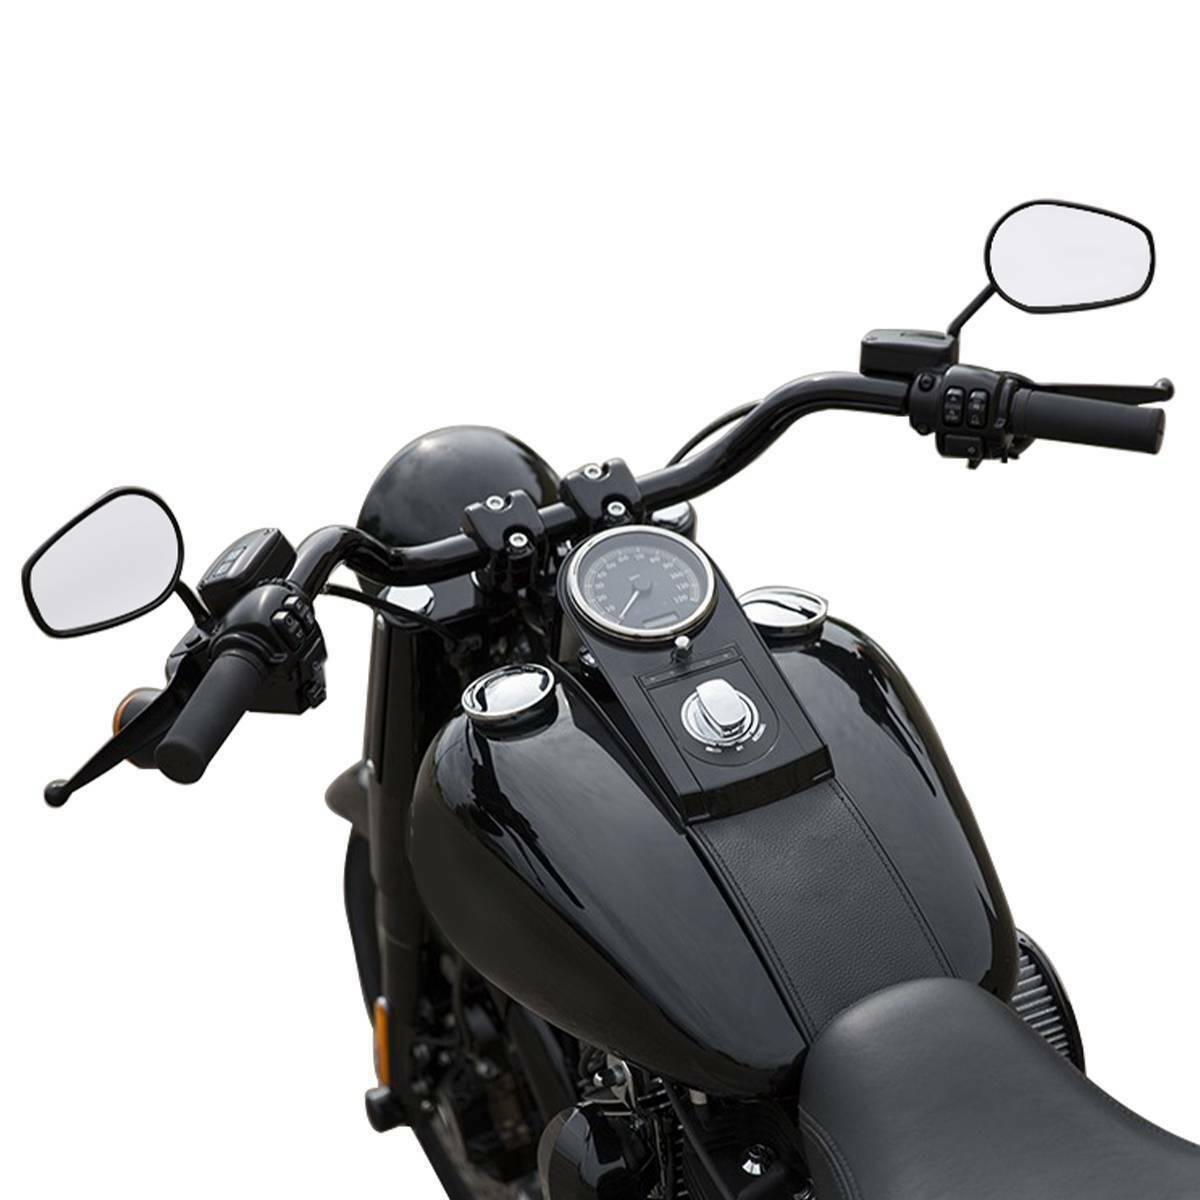 3.5" Rise Fat HandleBar Fit For Harley Sportster XL Softail Road King FLHR - Moto Life Products